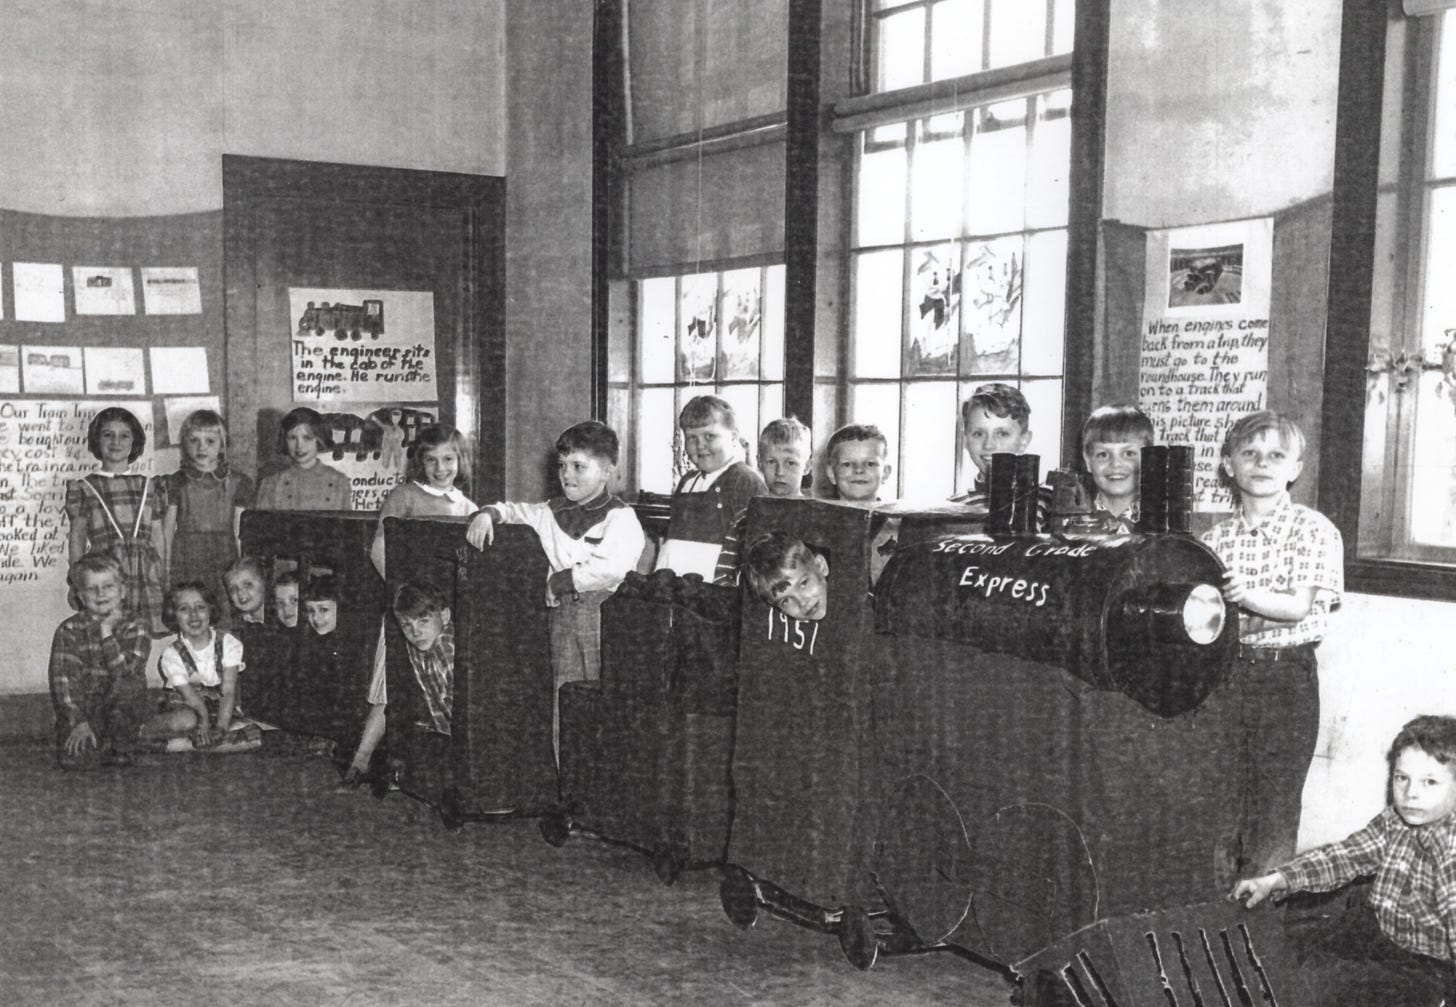 Second grade students with model of a train